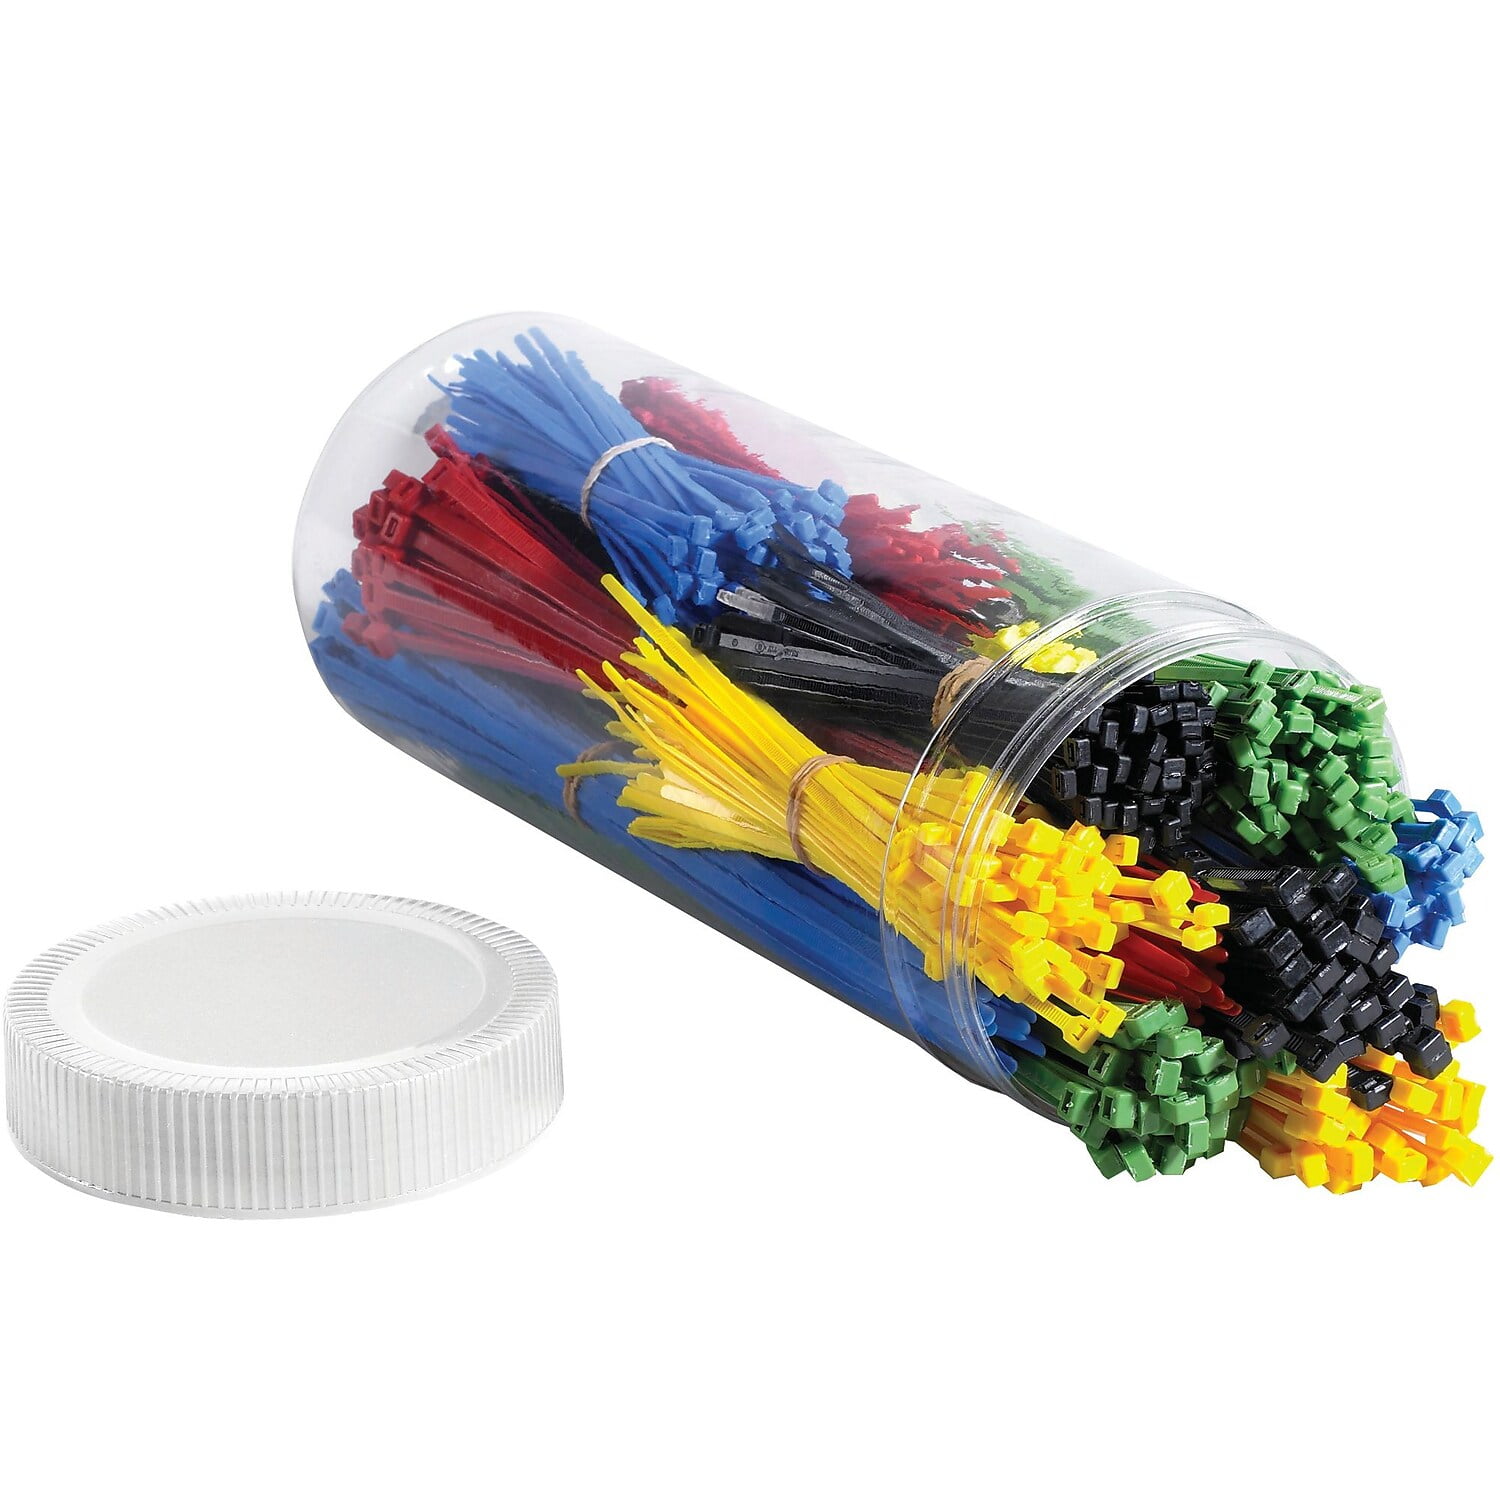 Ctkit15 Assorted Color Nylon Cable Tie Kit